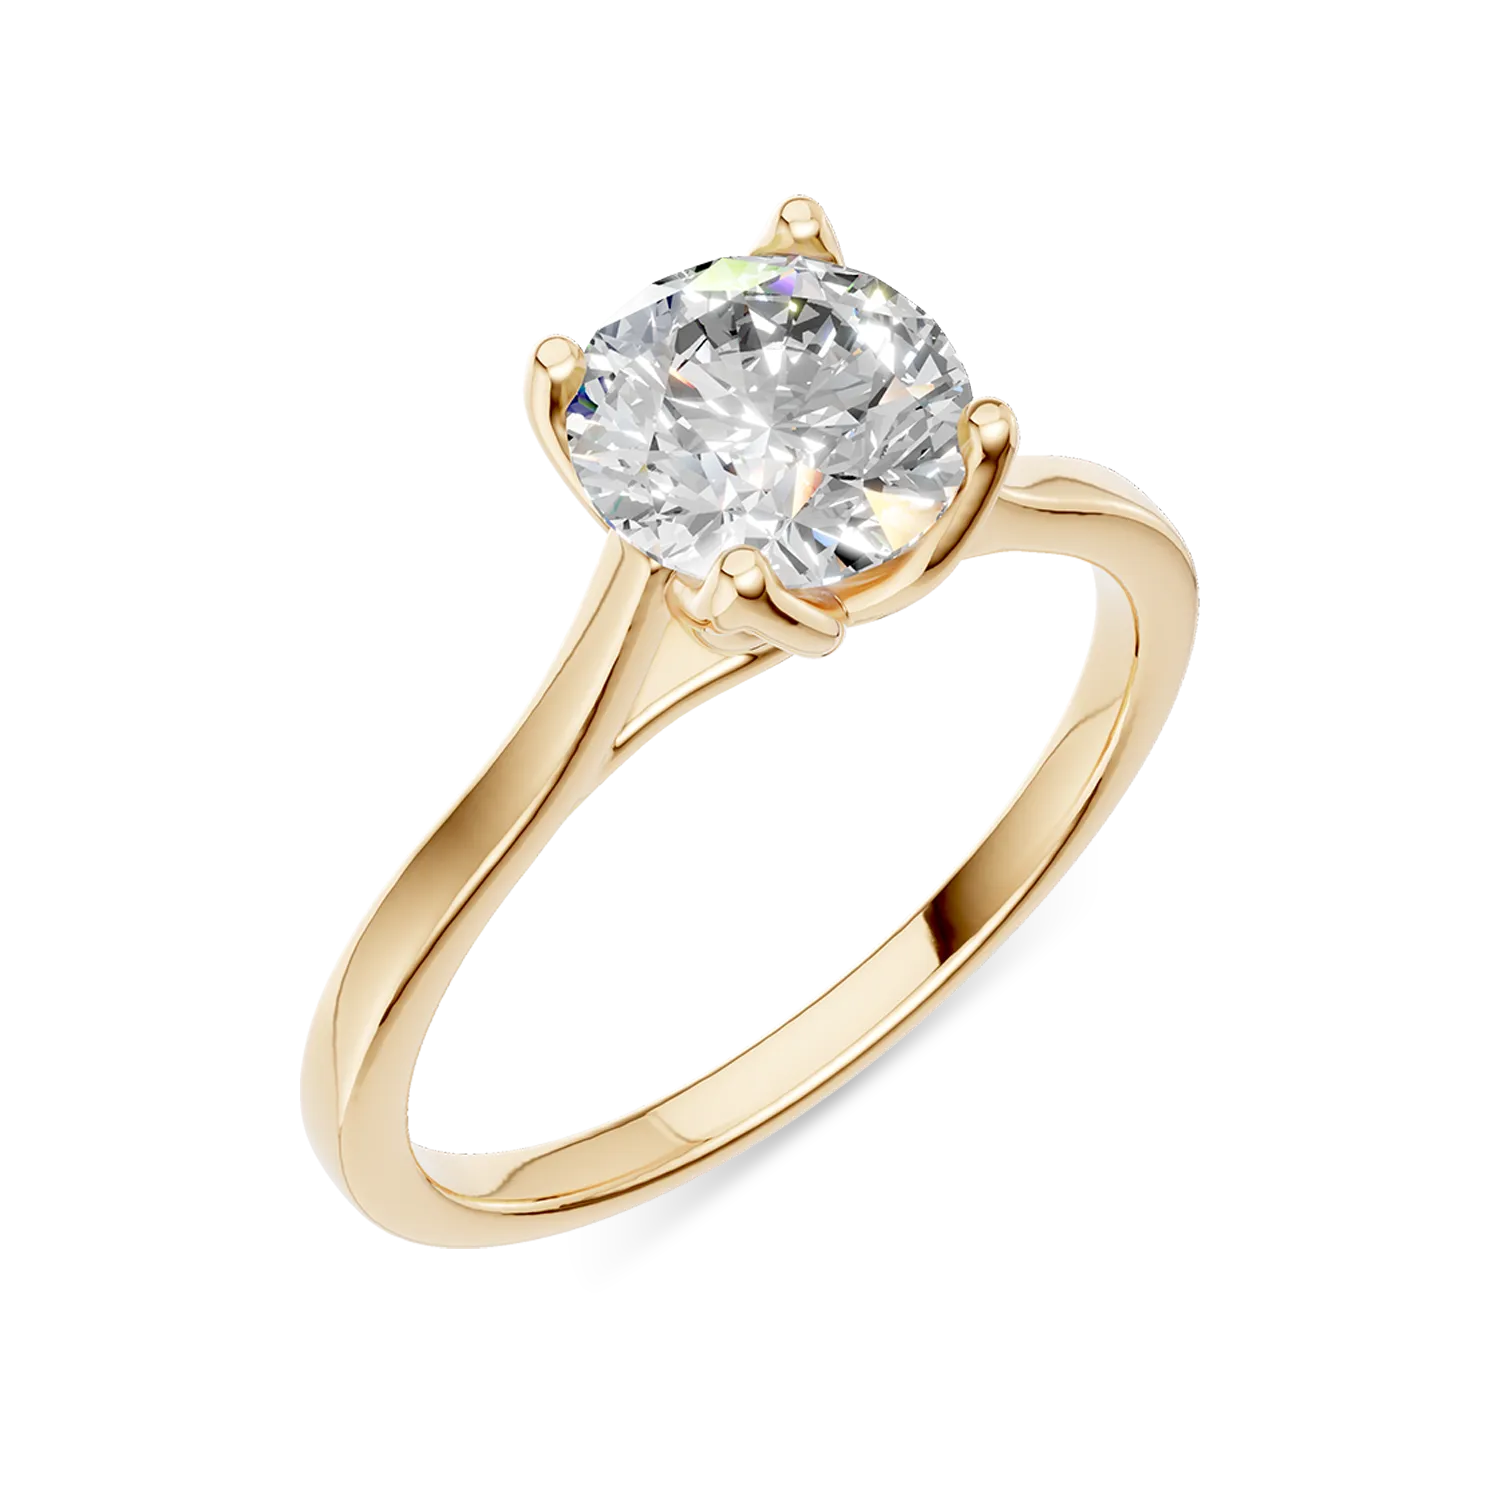 Yellow gold Lotus engagement ring with 1.02ct solitaire lab grown diamond